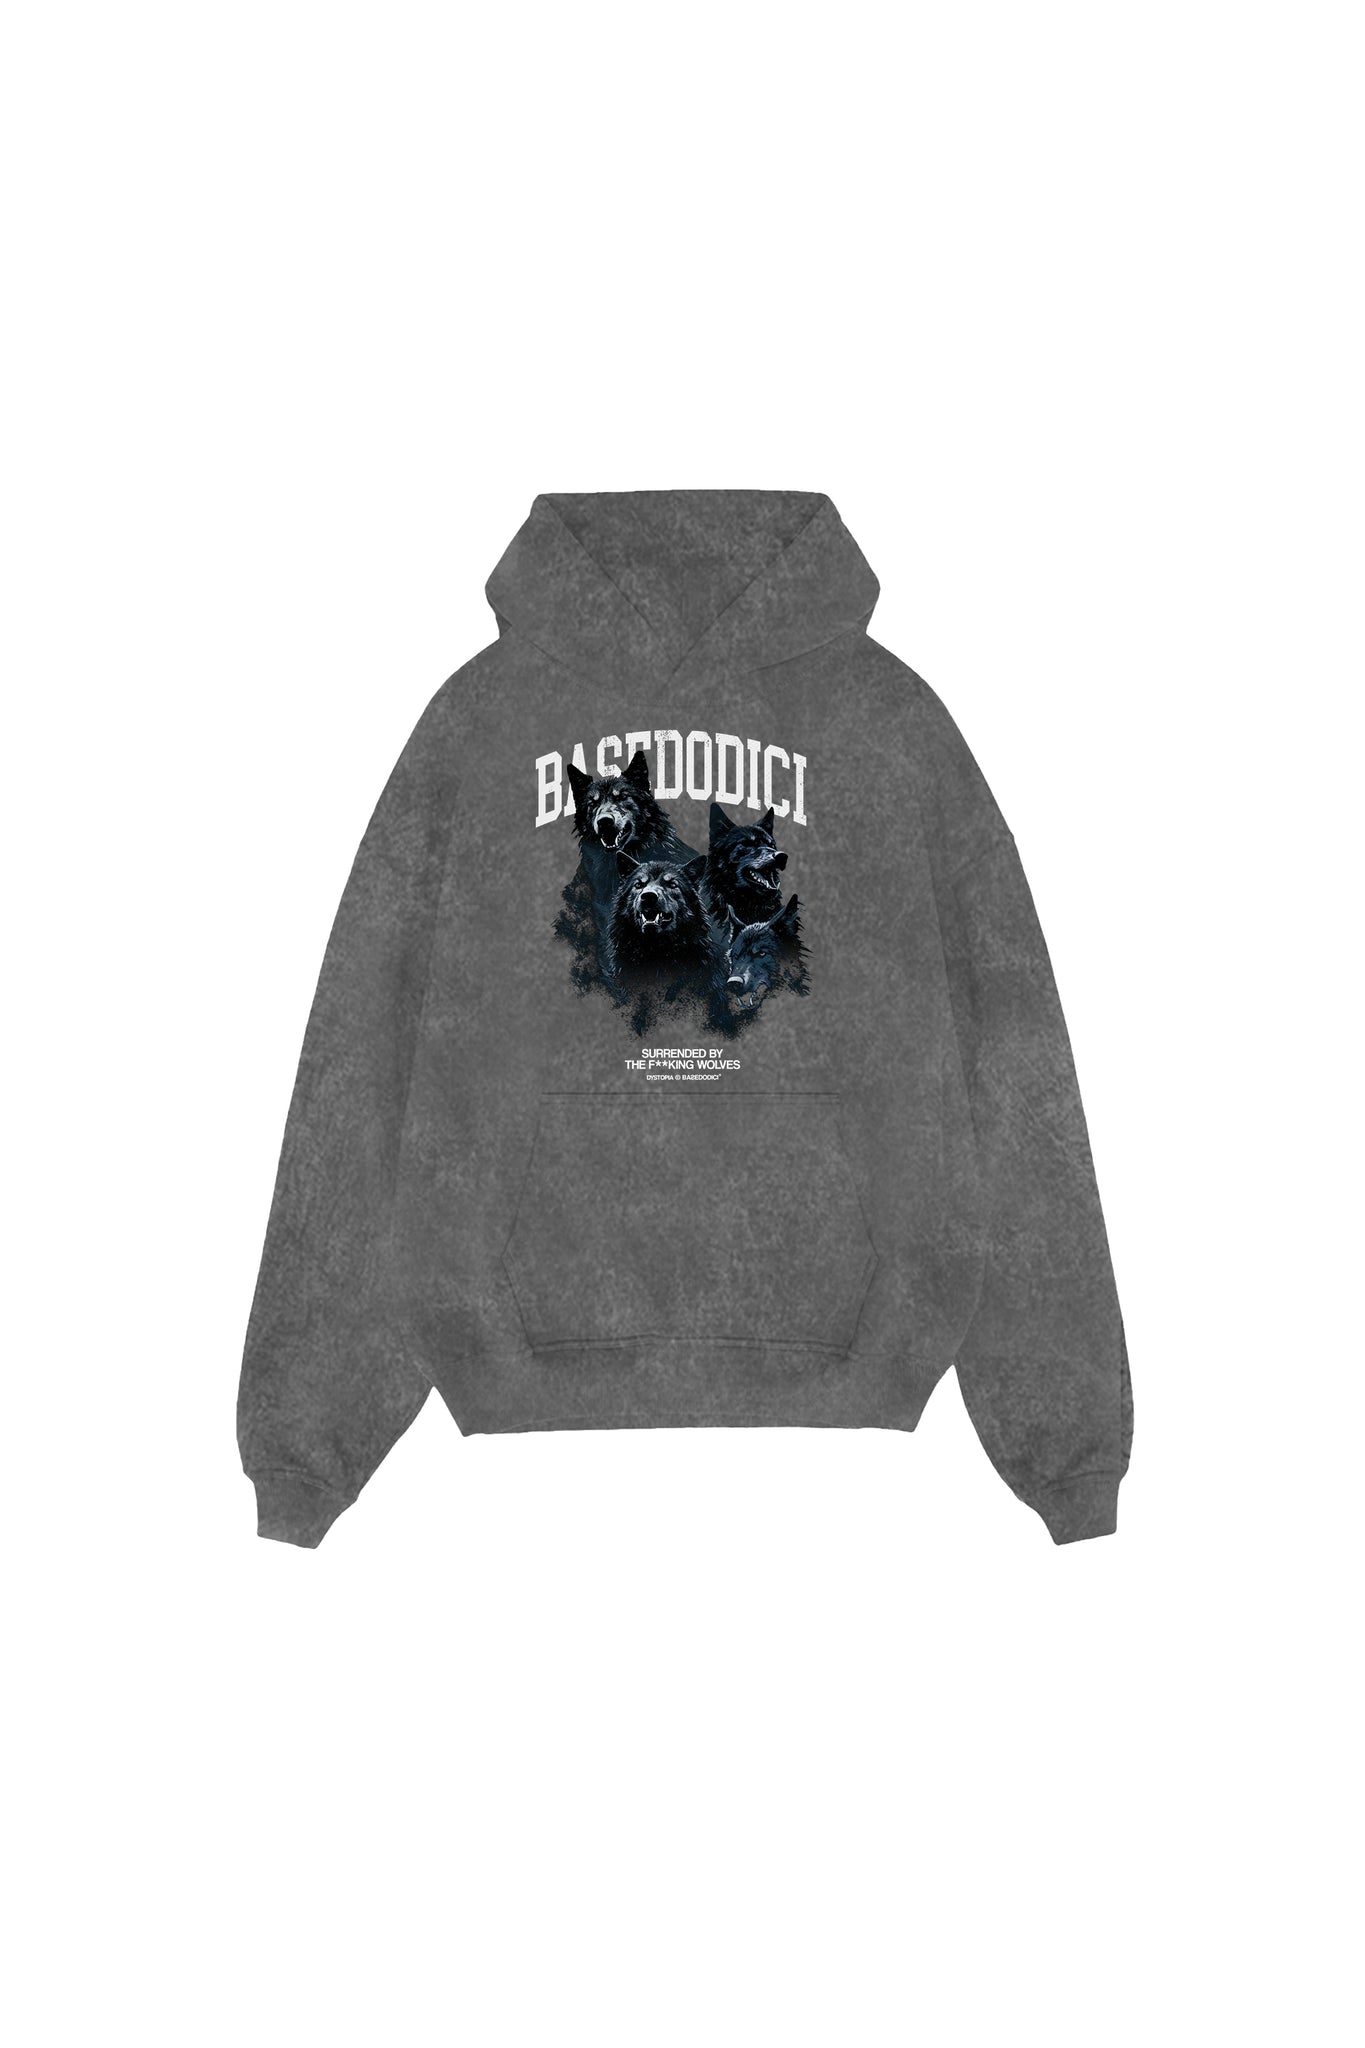 Hoodie “DYSTOPIA” Wolves Stone Washed